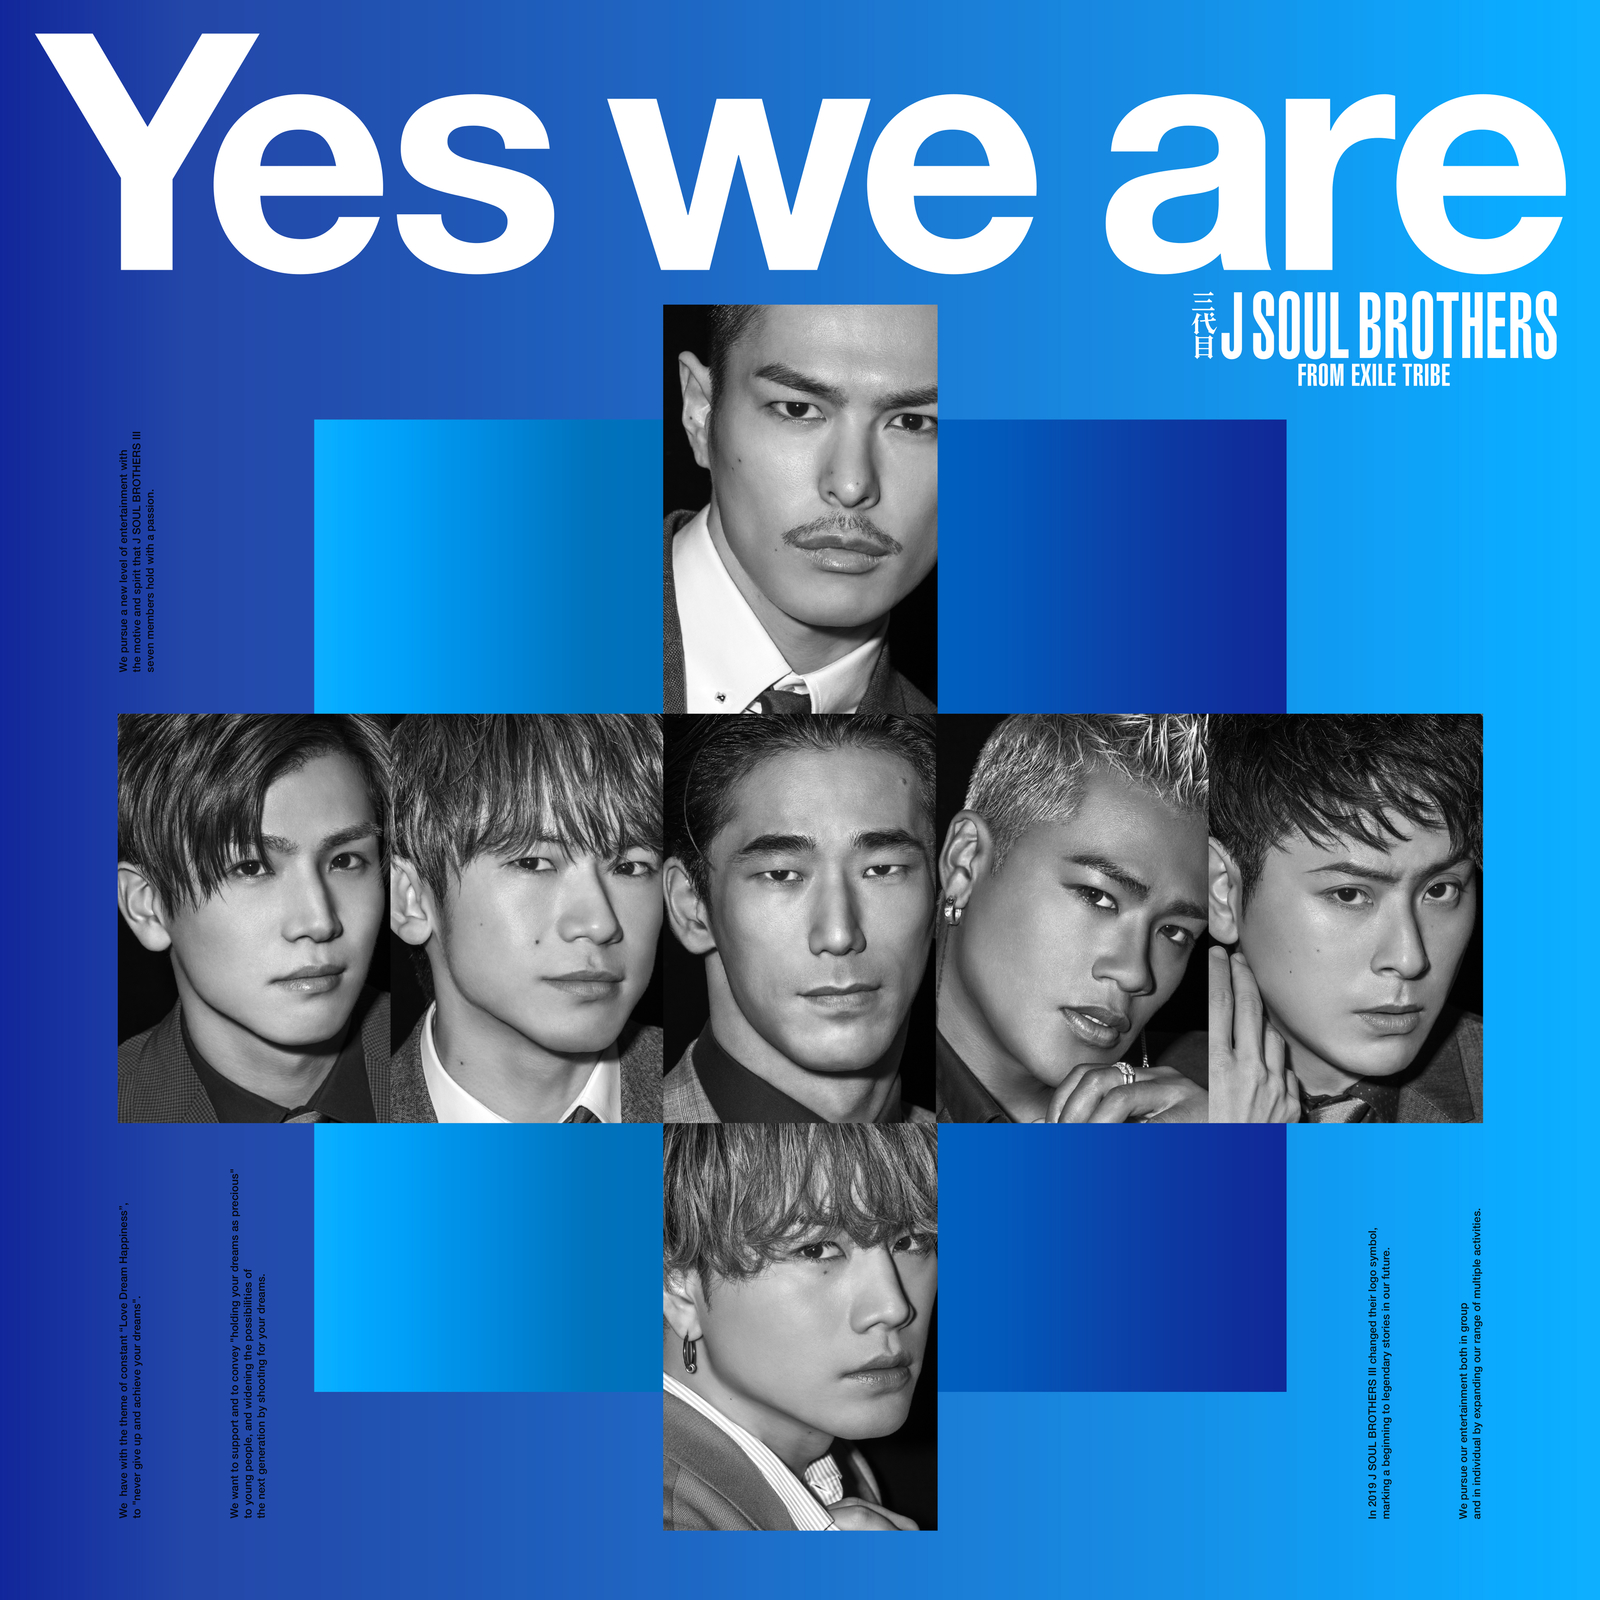 Yes we are歌词 歌手三代目 J SOUL BROTHERS from EXILE TRIBE-专辑Yes we are-单曲《Yes we are》LRC歌词下载